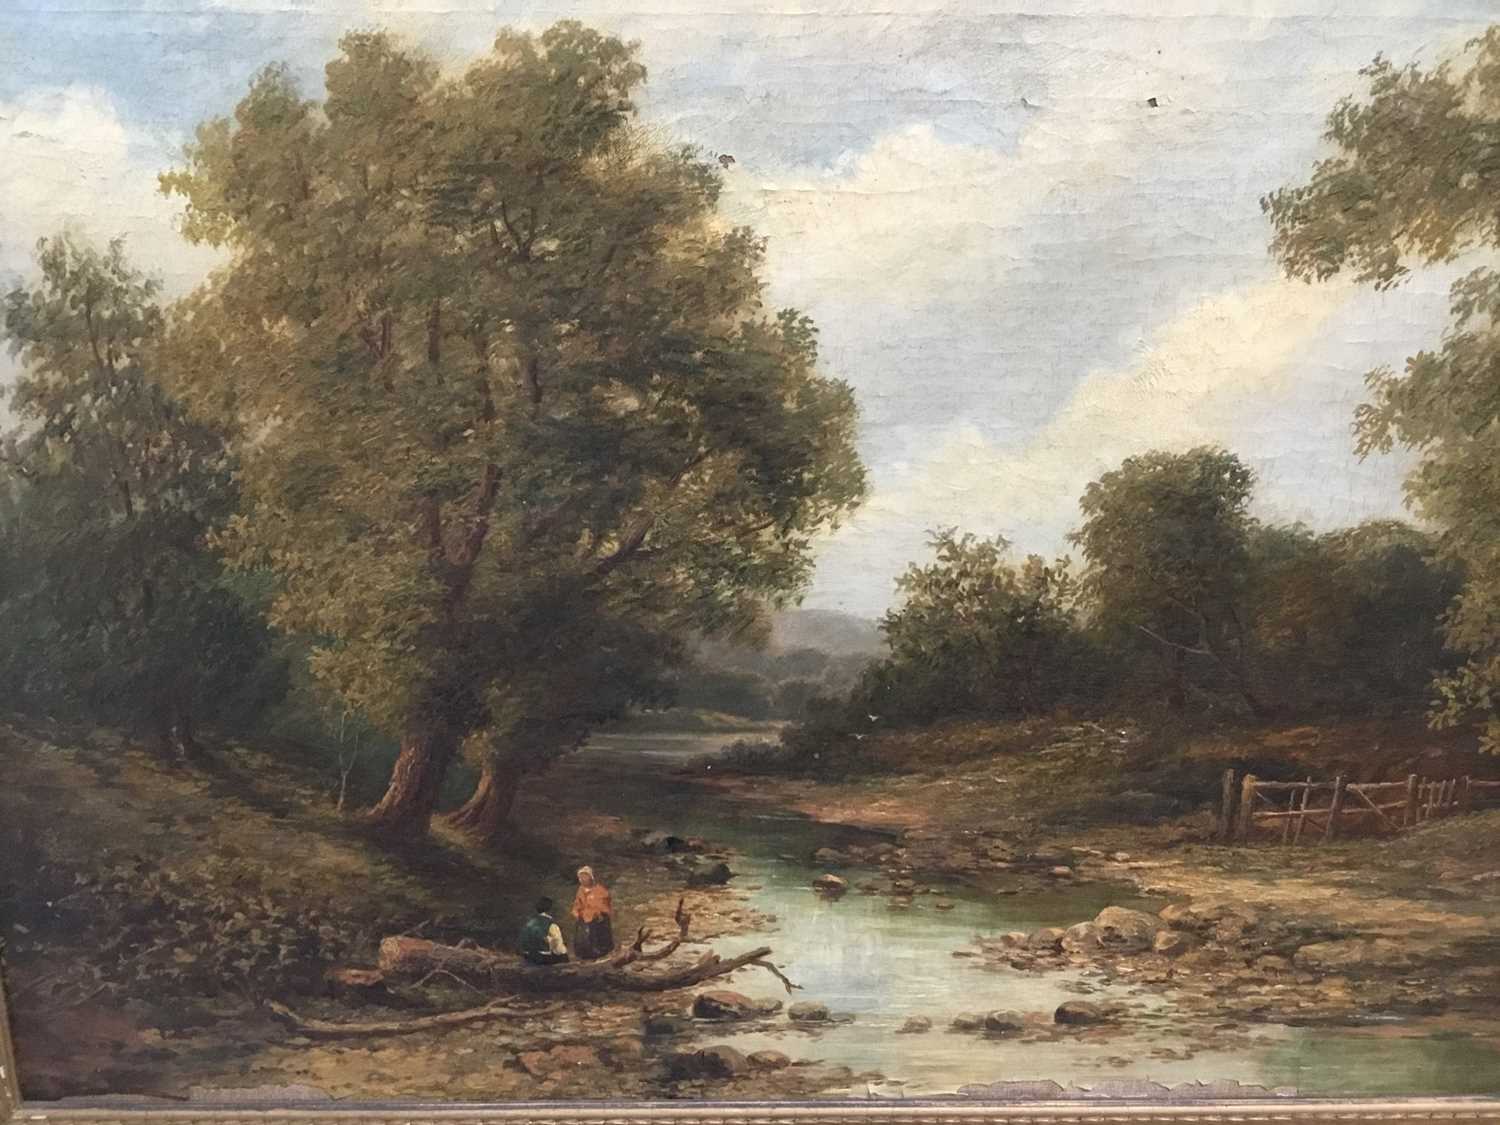 19th century English School oil on canvas - figures by a river bank, in gilt frame - Image 8 of 9